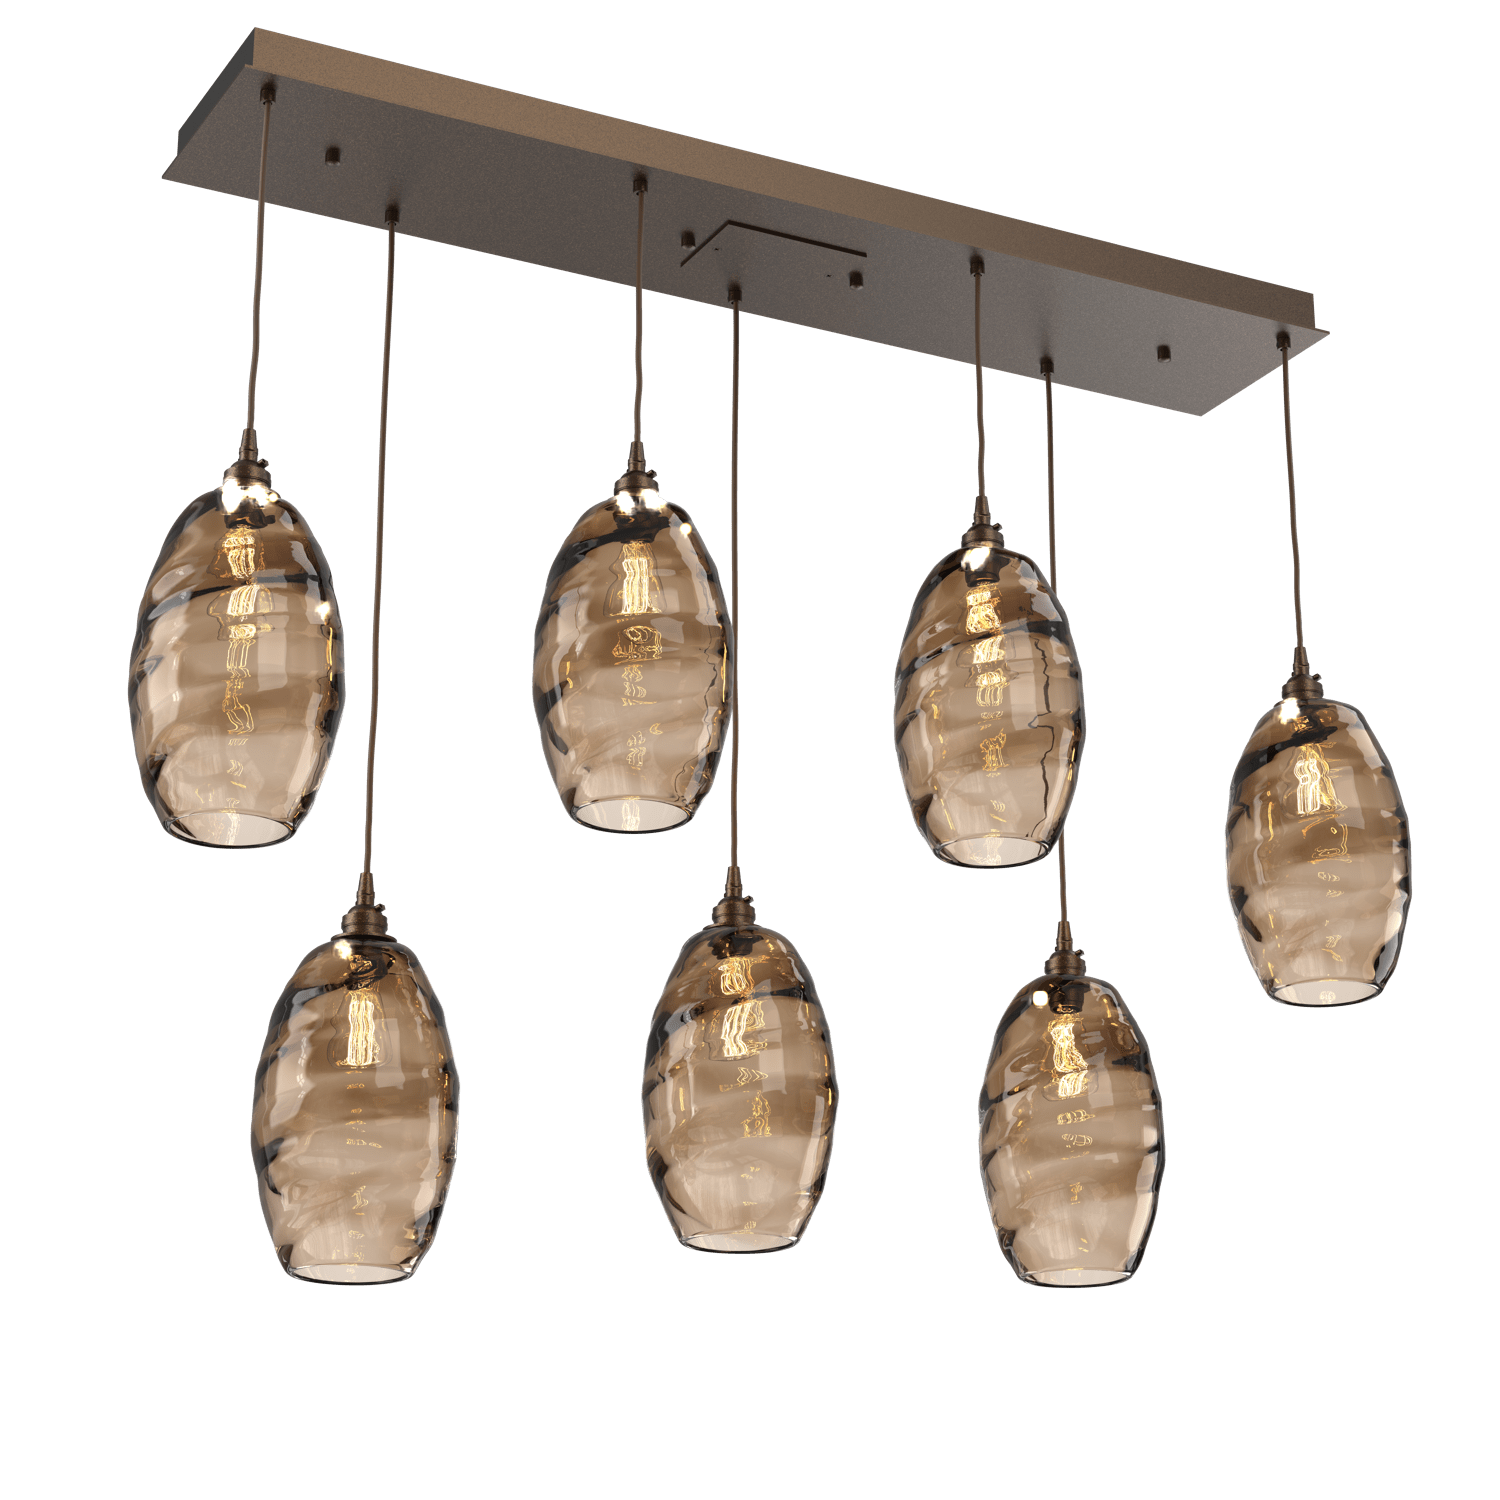 PLB0035-07-FB-OB-Hammerton-Studio-Optic-Blown-Glass-Elisse-7-light-linear-pendant-chandelier-with-flat-bronze-finish-and-optic-bronze-blown-glass-shades-and-incandescent-lamping